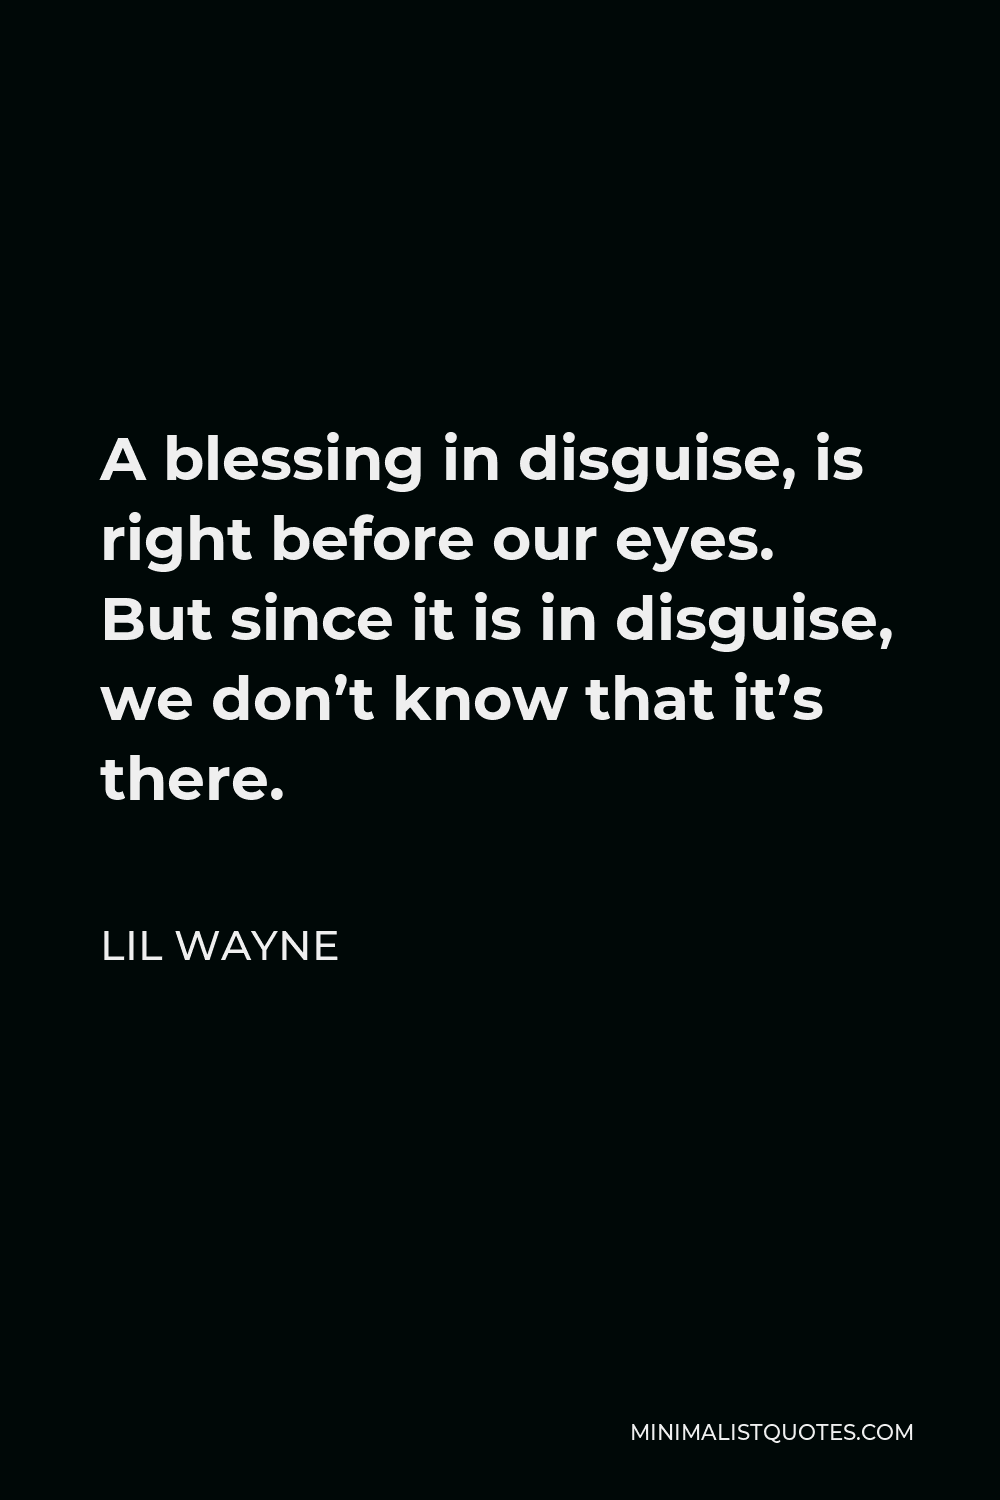 Lil Wayne Quote - A blessing in disguise, is right before our eyes. But since it is in disguise, we don’t know that it’s there.